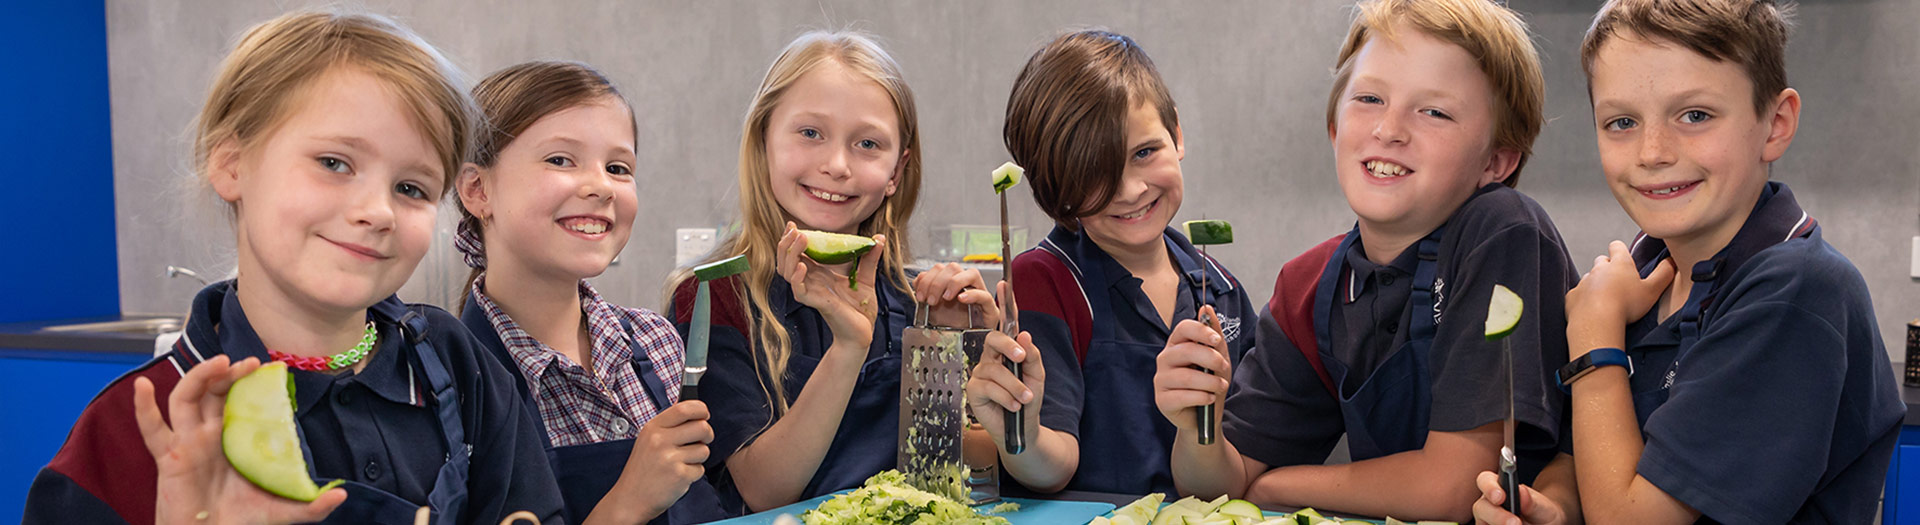 smiling students grating zucchini in a school kitchen